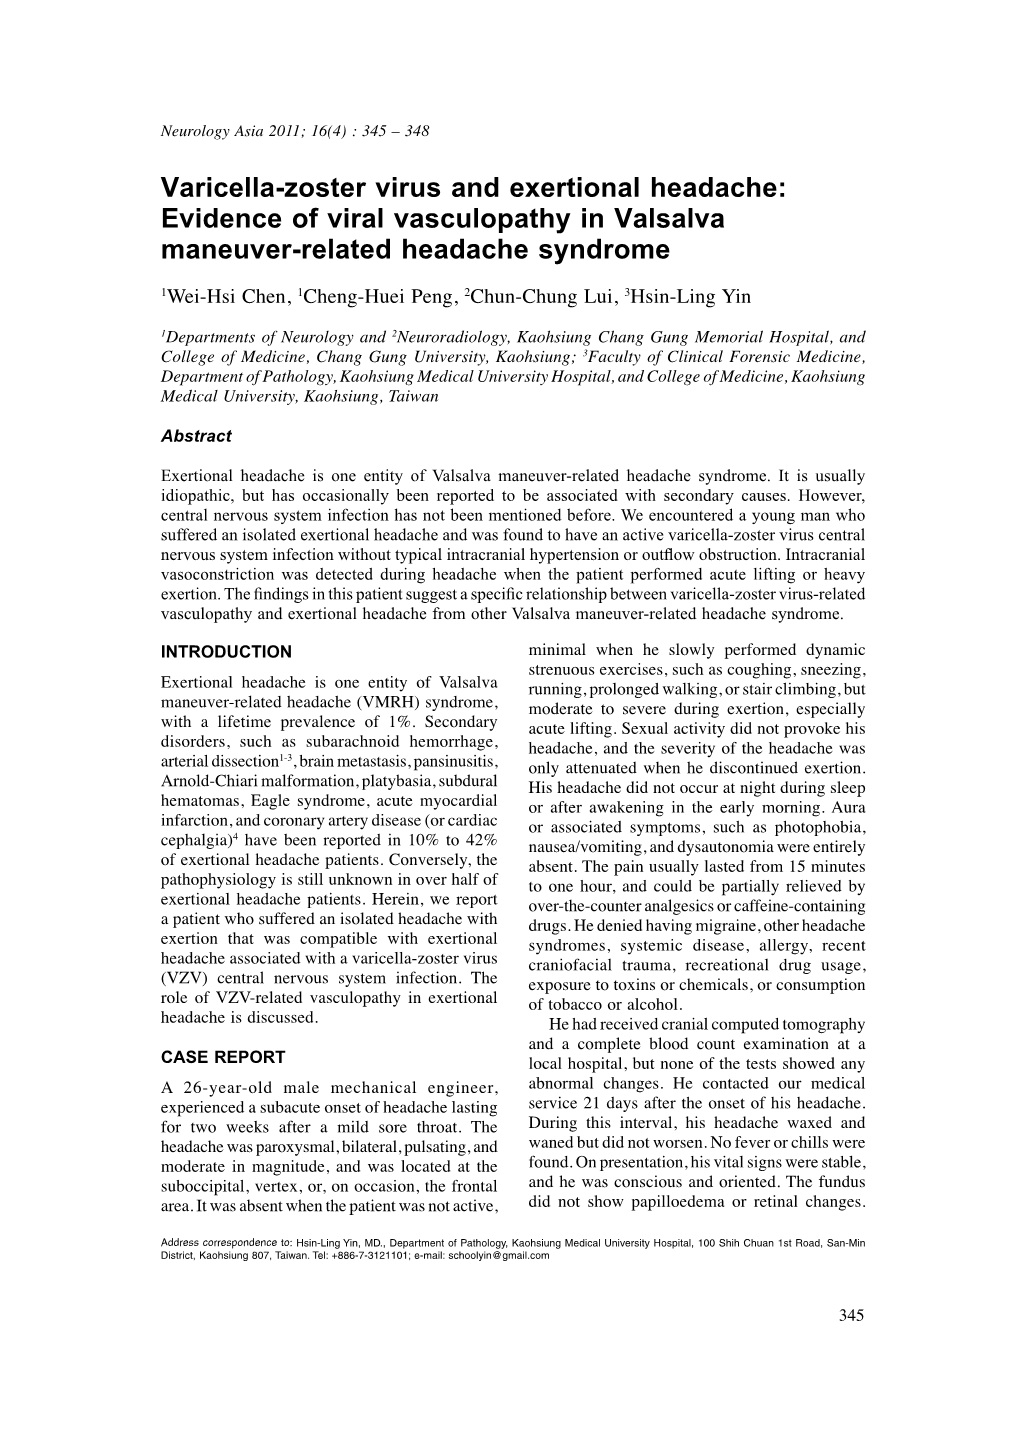 Varicella-Zoster Virus and Exertional Headache: Evidence of Viral Vasculopathy in Valsalva Maneuver-Related Headache Syndrome